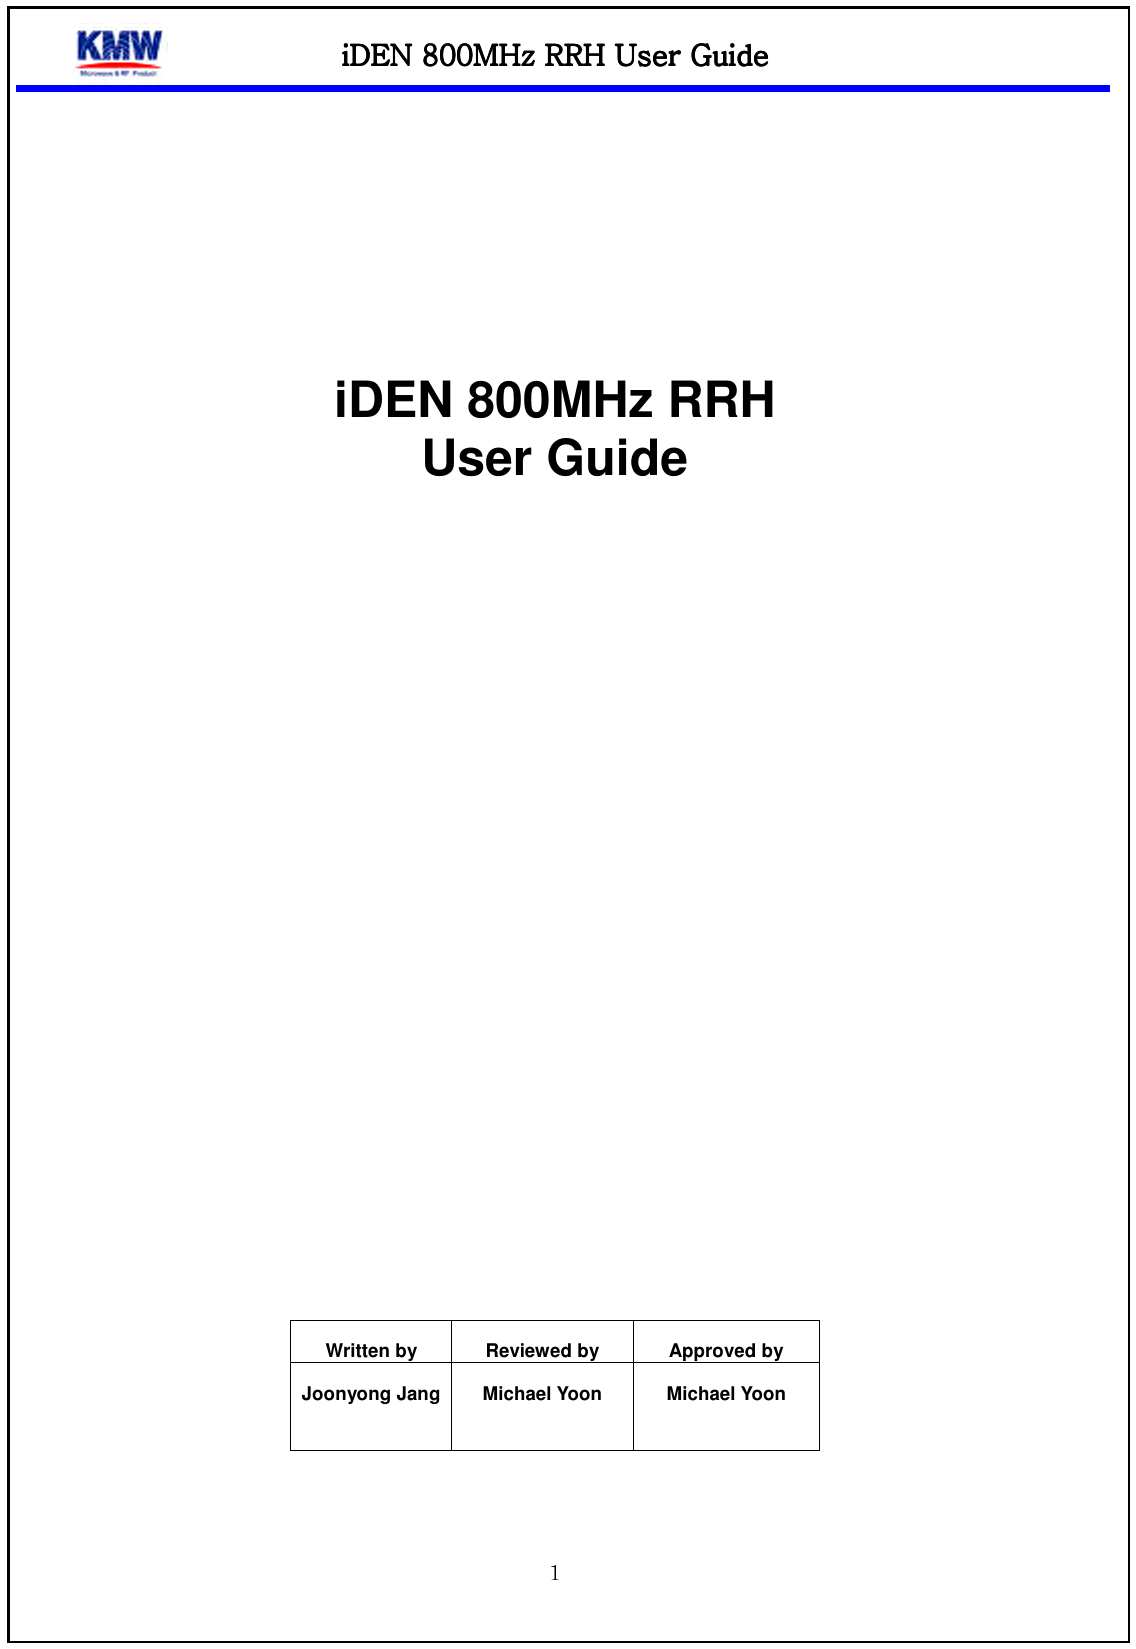 iDEN 800MHz RRHiDEN 800MHz RRHiDEN 800MHz RRHiDEN 800MHz RRH    UUUUser Guideser Guideser Guideser Guide            iDEN 800MHz RRH   User Guide                     Written by  Reviewed by  Approved by Joonyong Jang  Michael Yoon  Michael Yoon   